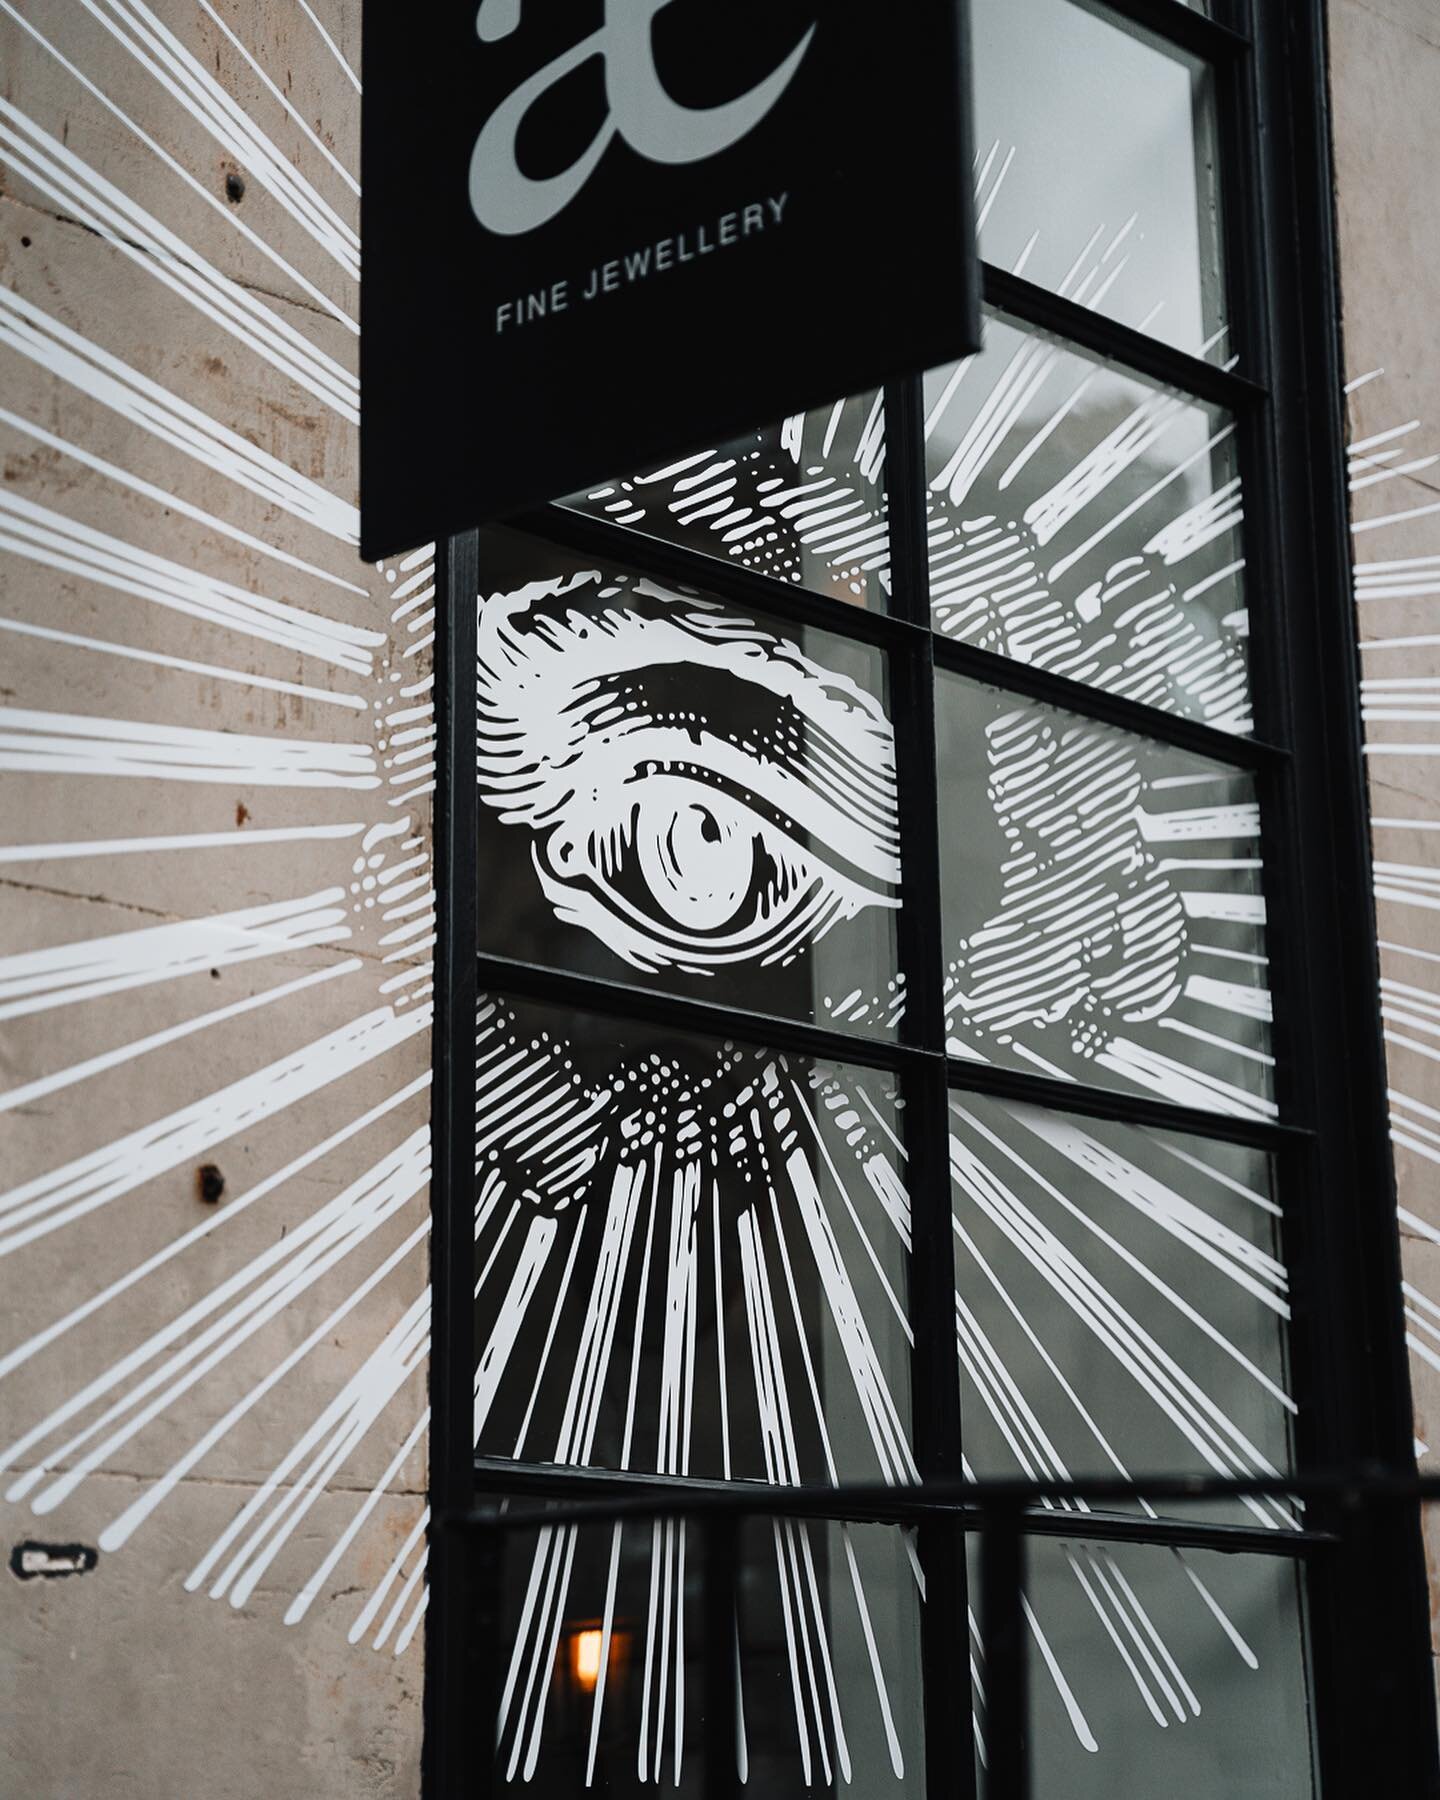 👀ALL EYES ON THIS👀
.
Beauty is in the eye of the beholder - literally. Some high detailed, high impact window, wall and shop graphics for @_aetla_ @grainnemorton . 
.
Expertly templated and delicately cut, this pushes the limits of cut vinyl graphi